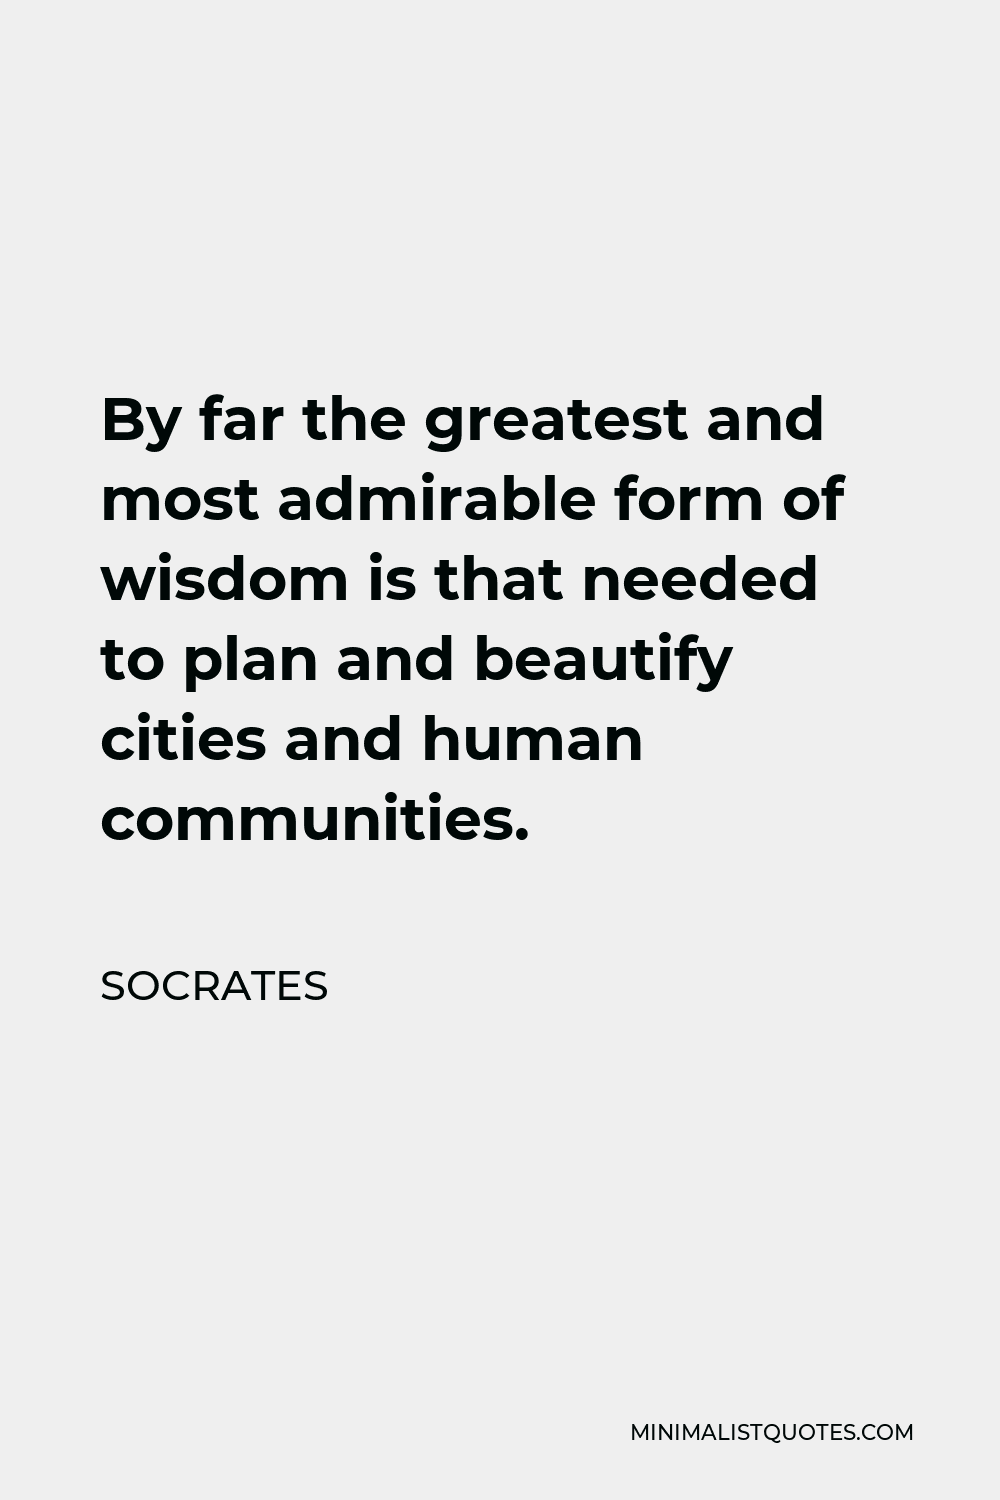 Socrates Quote - By far the greatest and most admirable form of wisdom is that needed to plan and beautify cities and human communities.